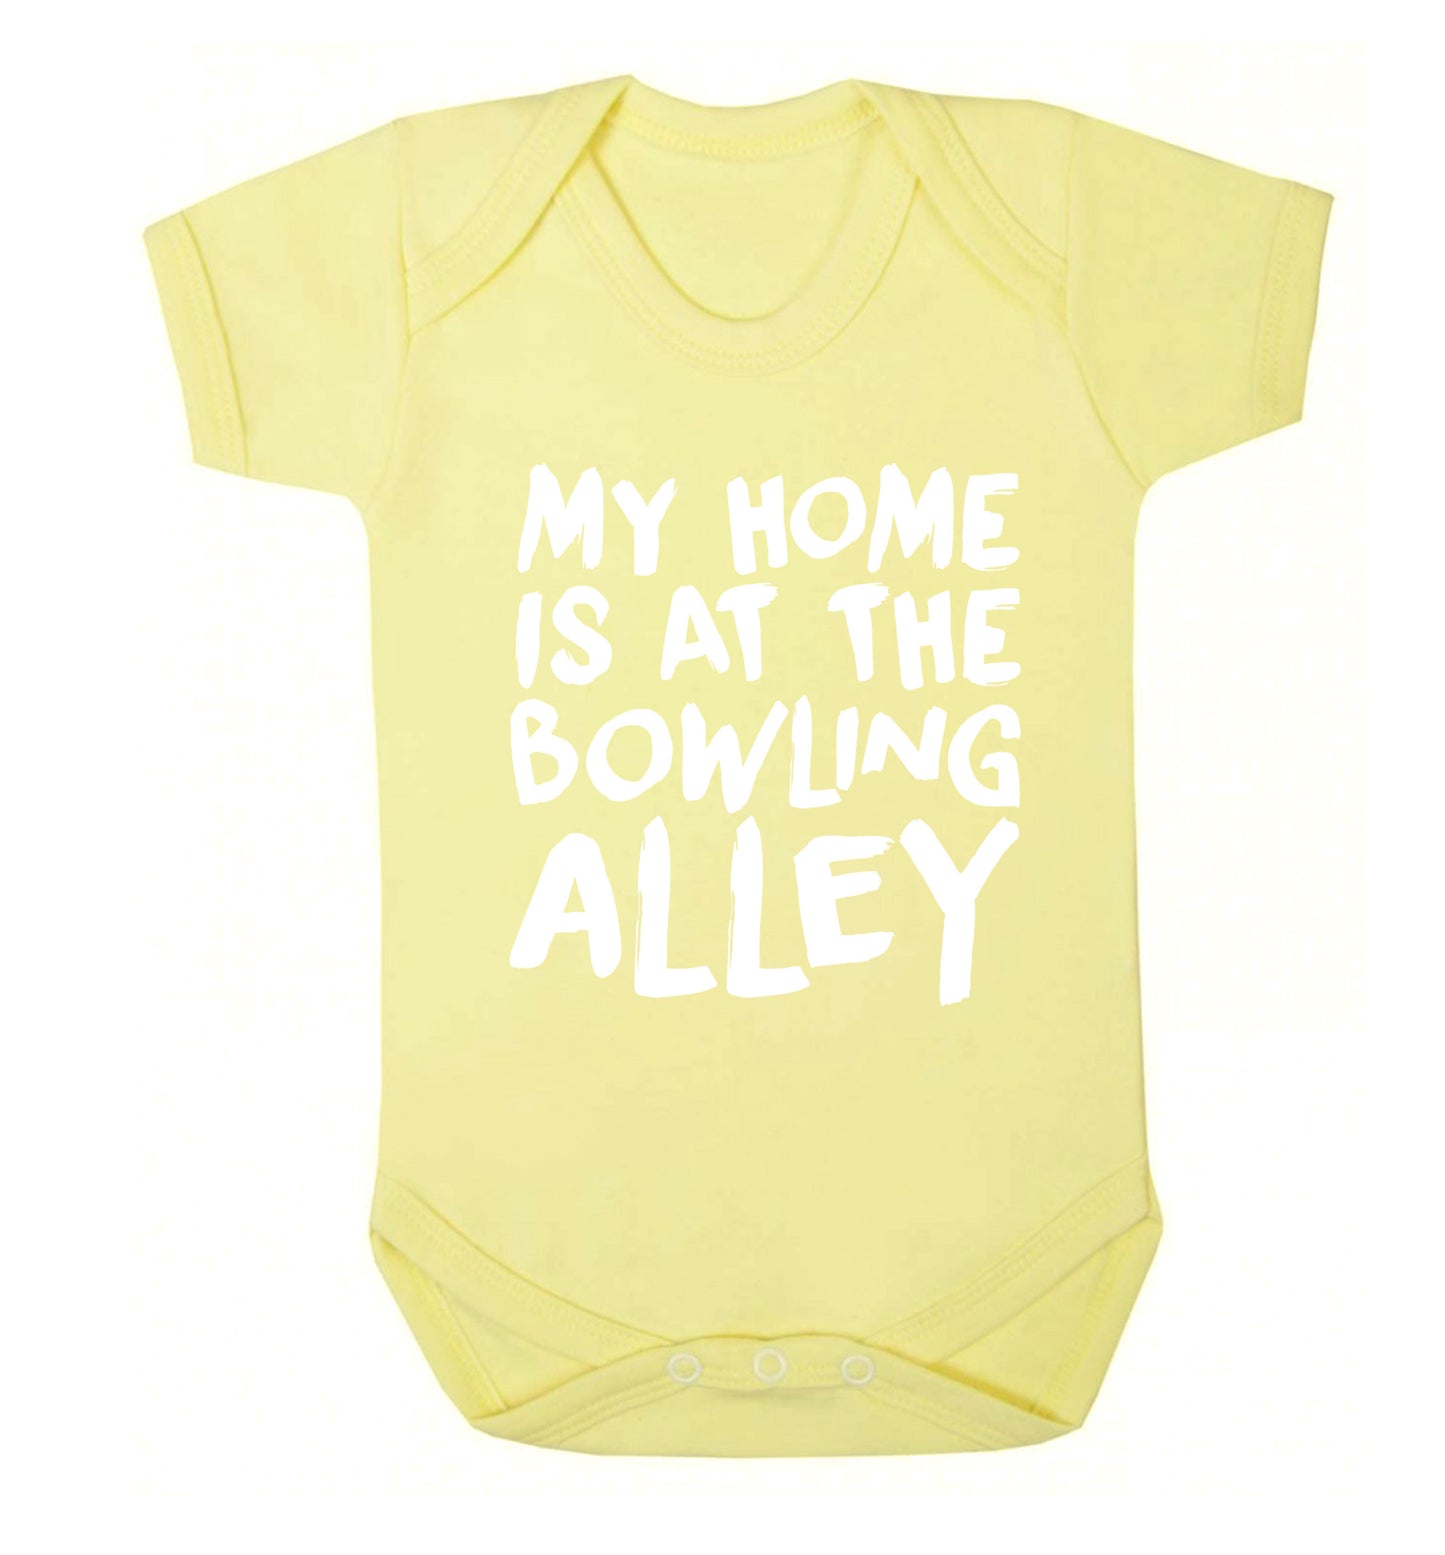 My home is at the bowling alley Baby Vest pale yellow 18-24 months